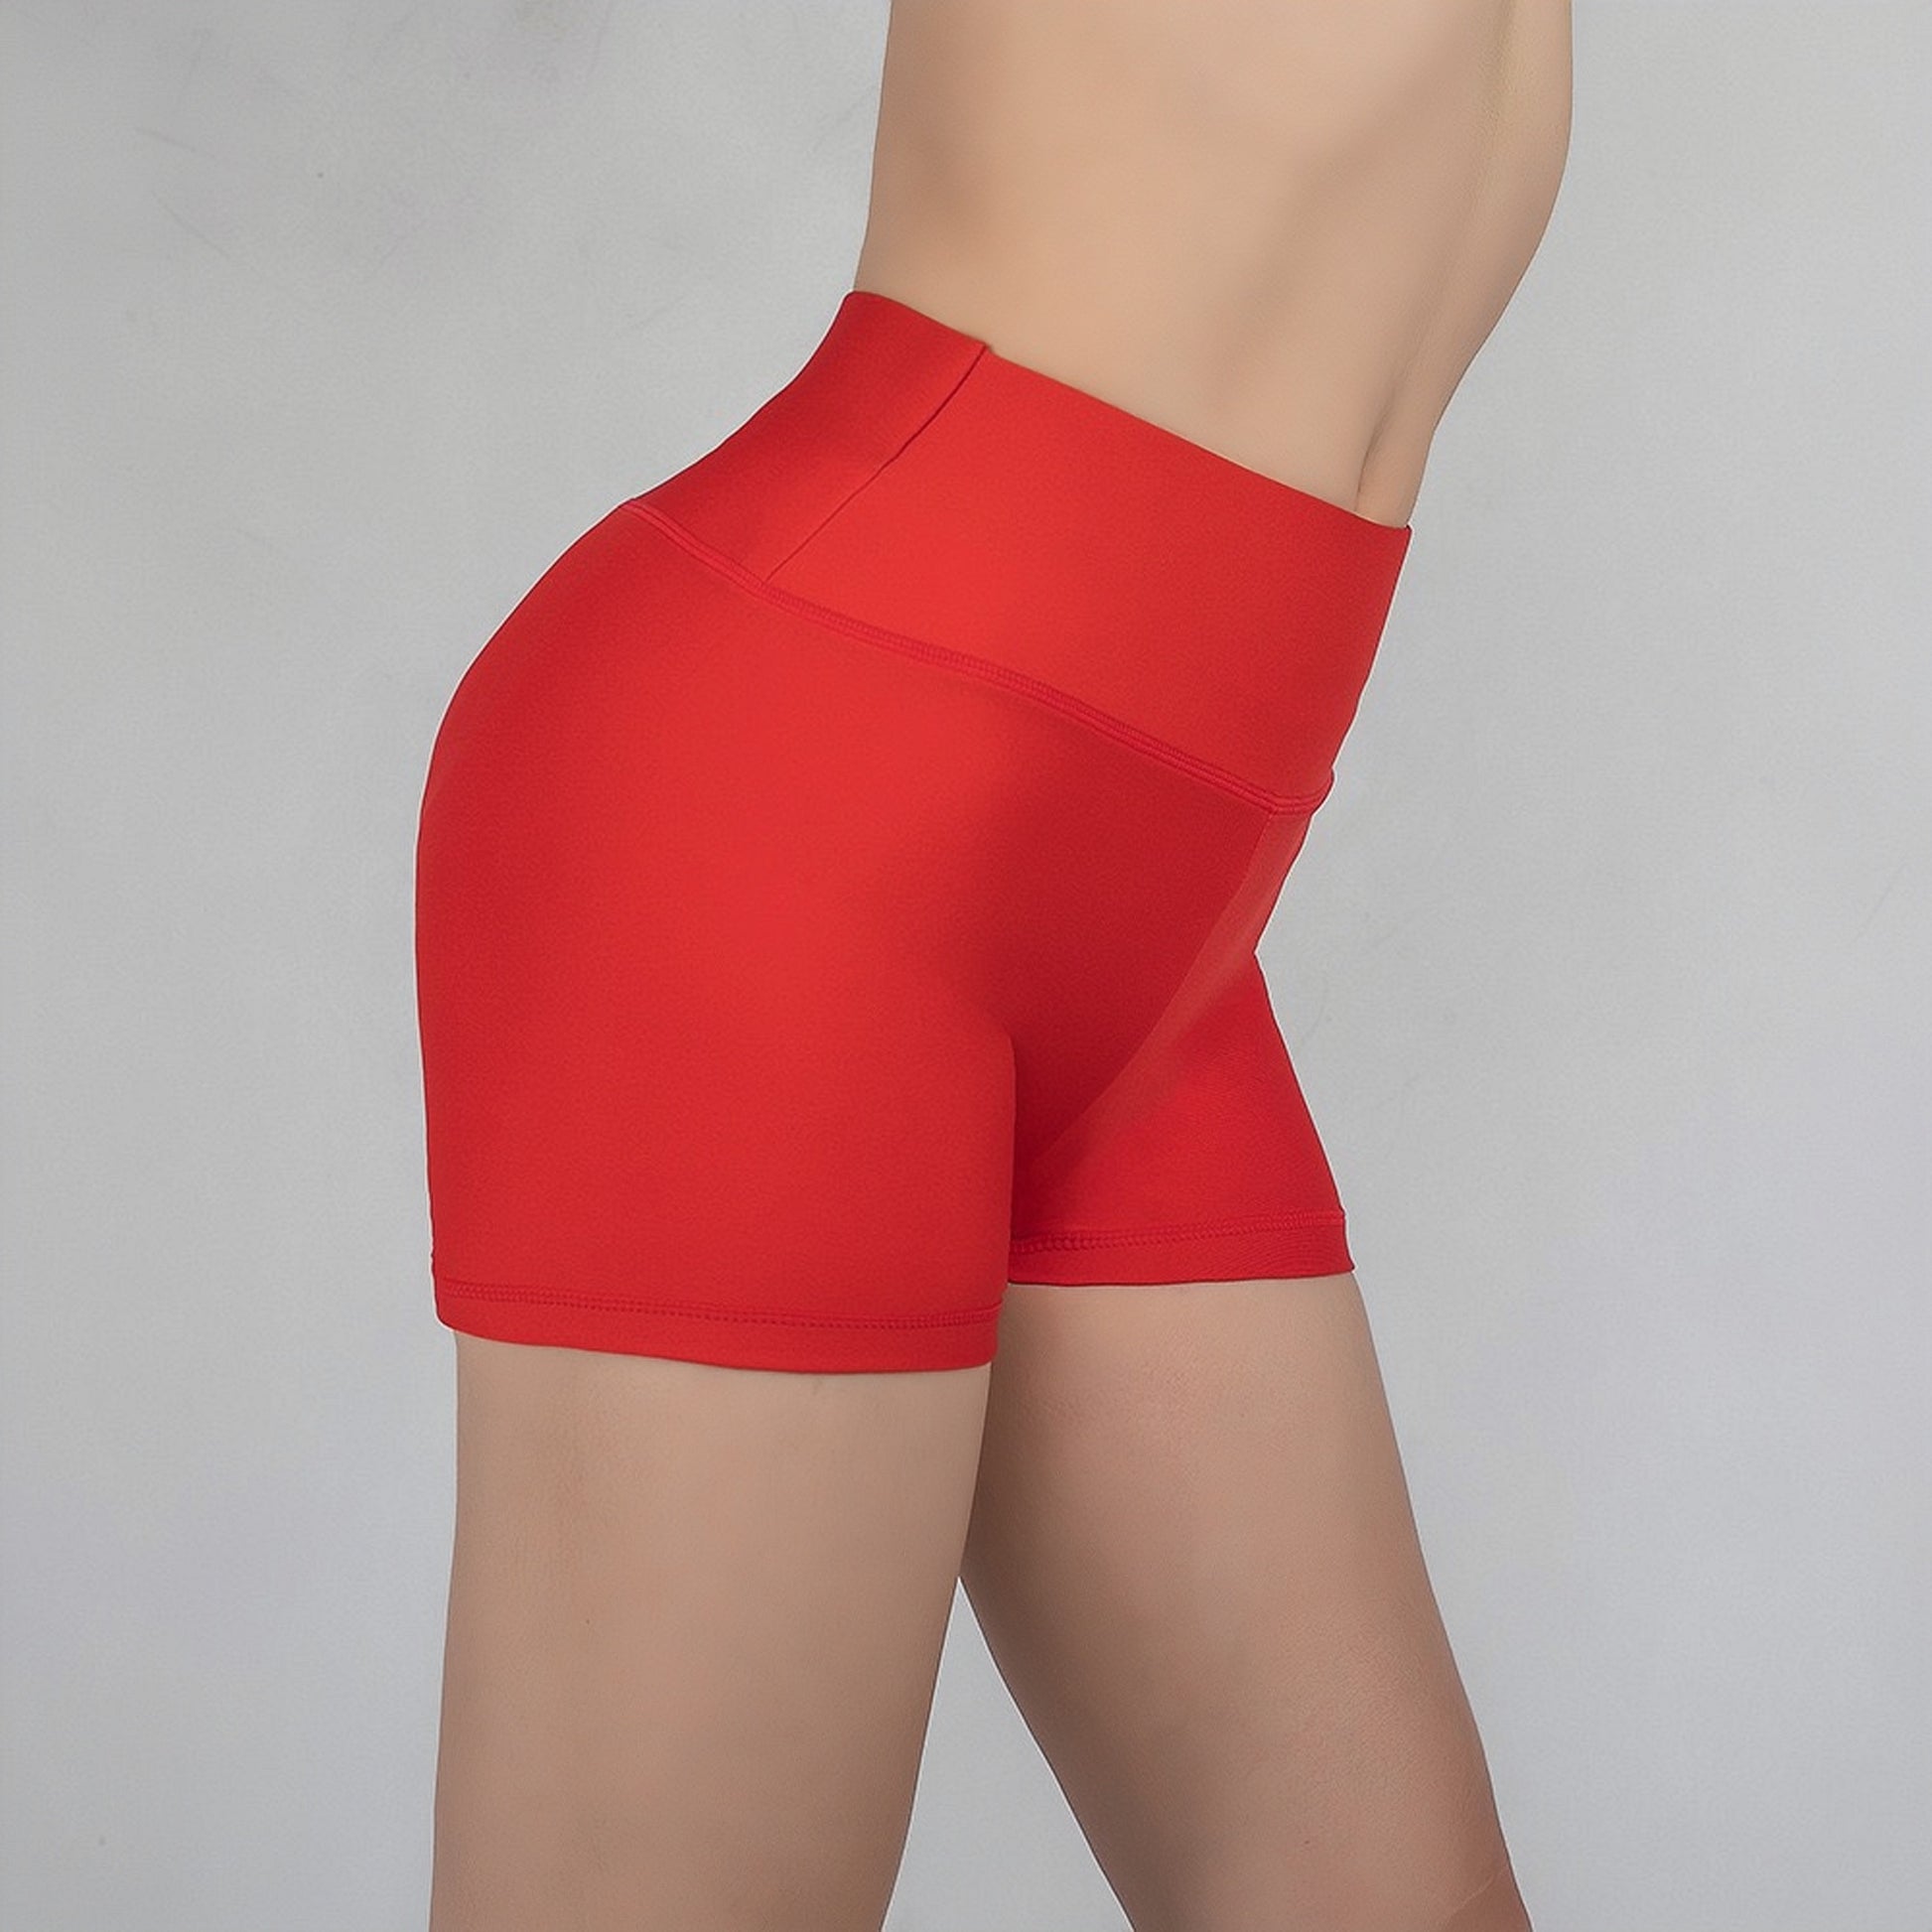 Peach high-waisted tight-fitting ballet pants with a butt-lifting